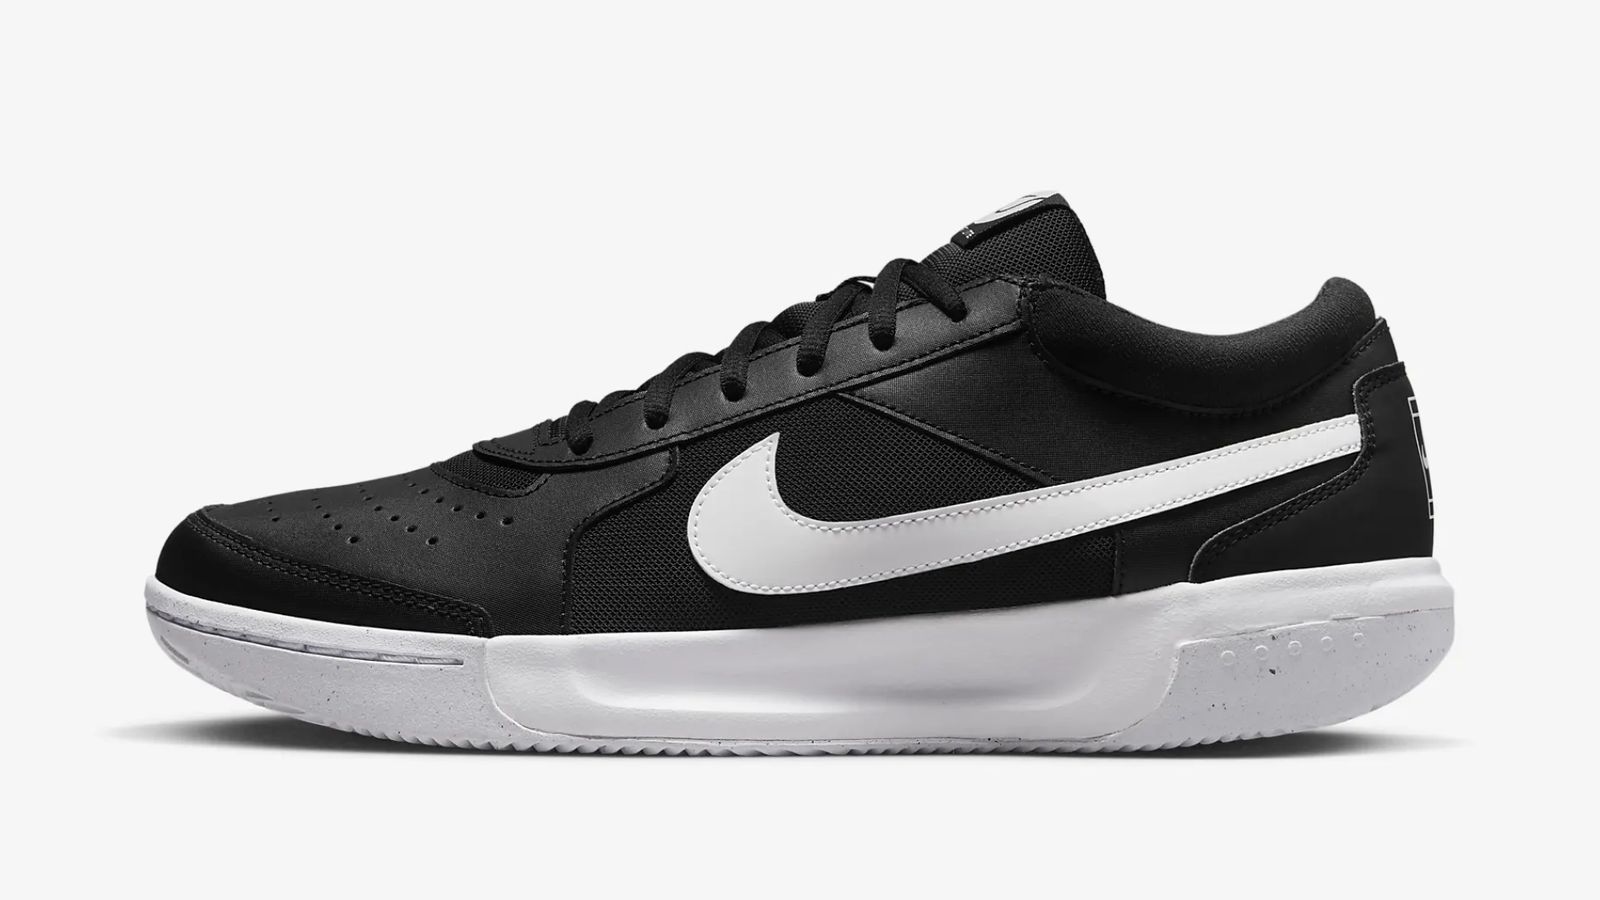 NikeCourt Zoom Lite 3 product image of a black tennis shoe featuring a white Swoosh down the side and white sole unit.